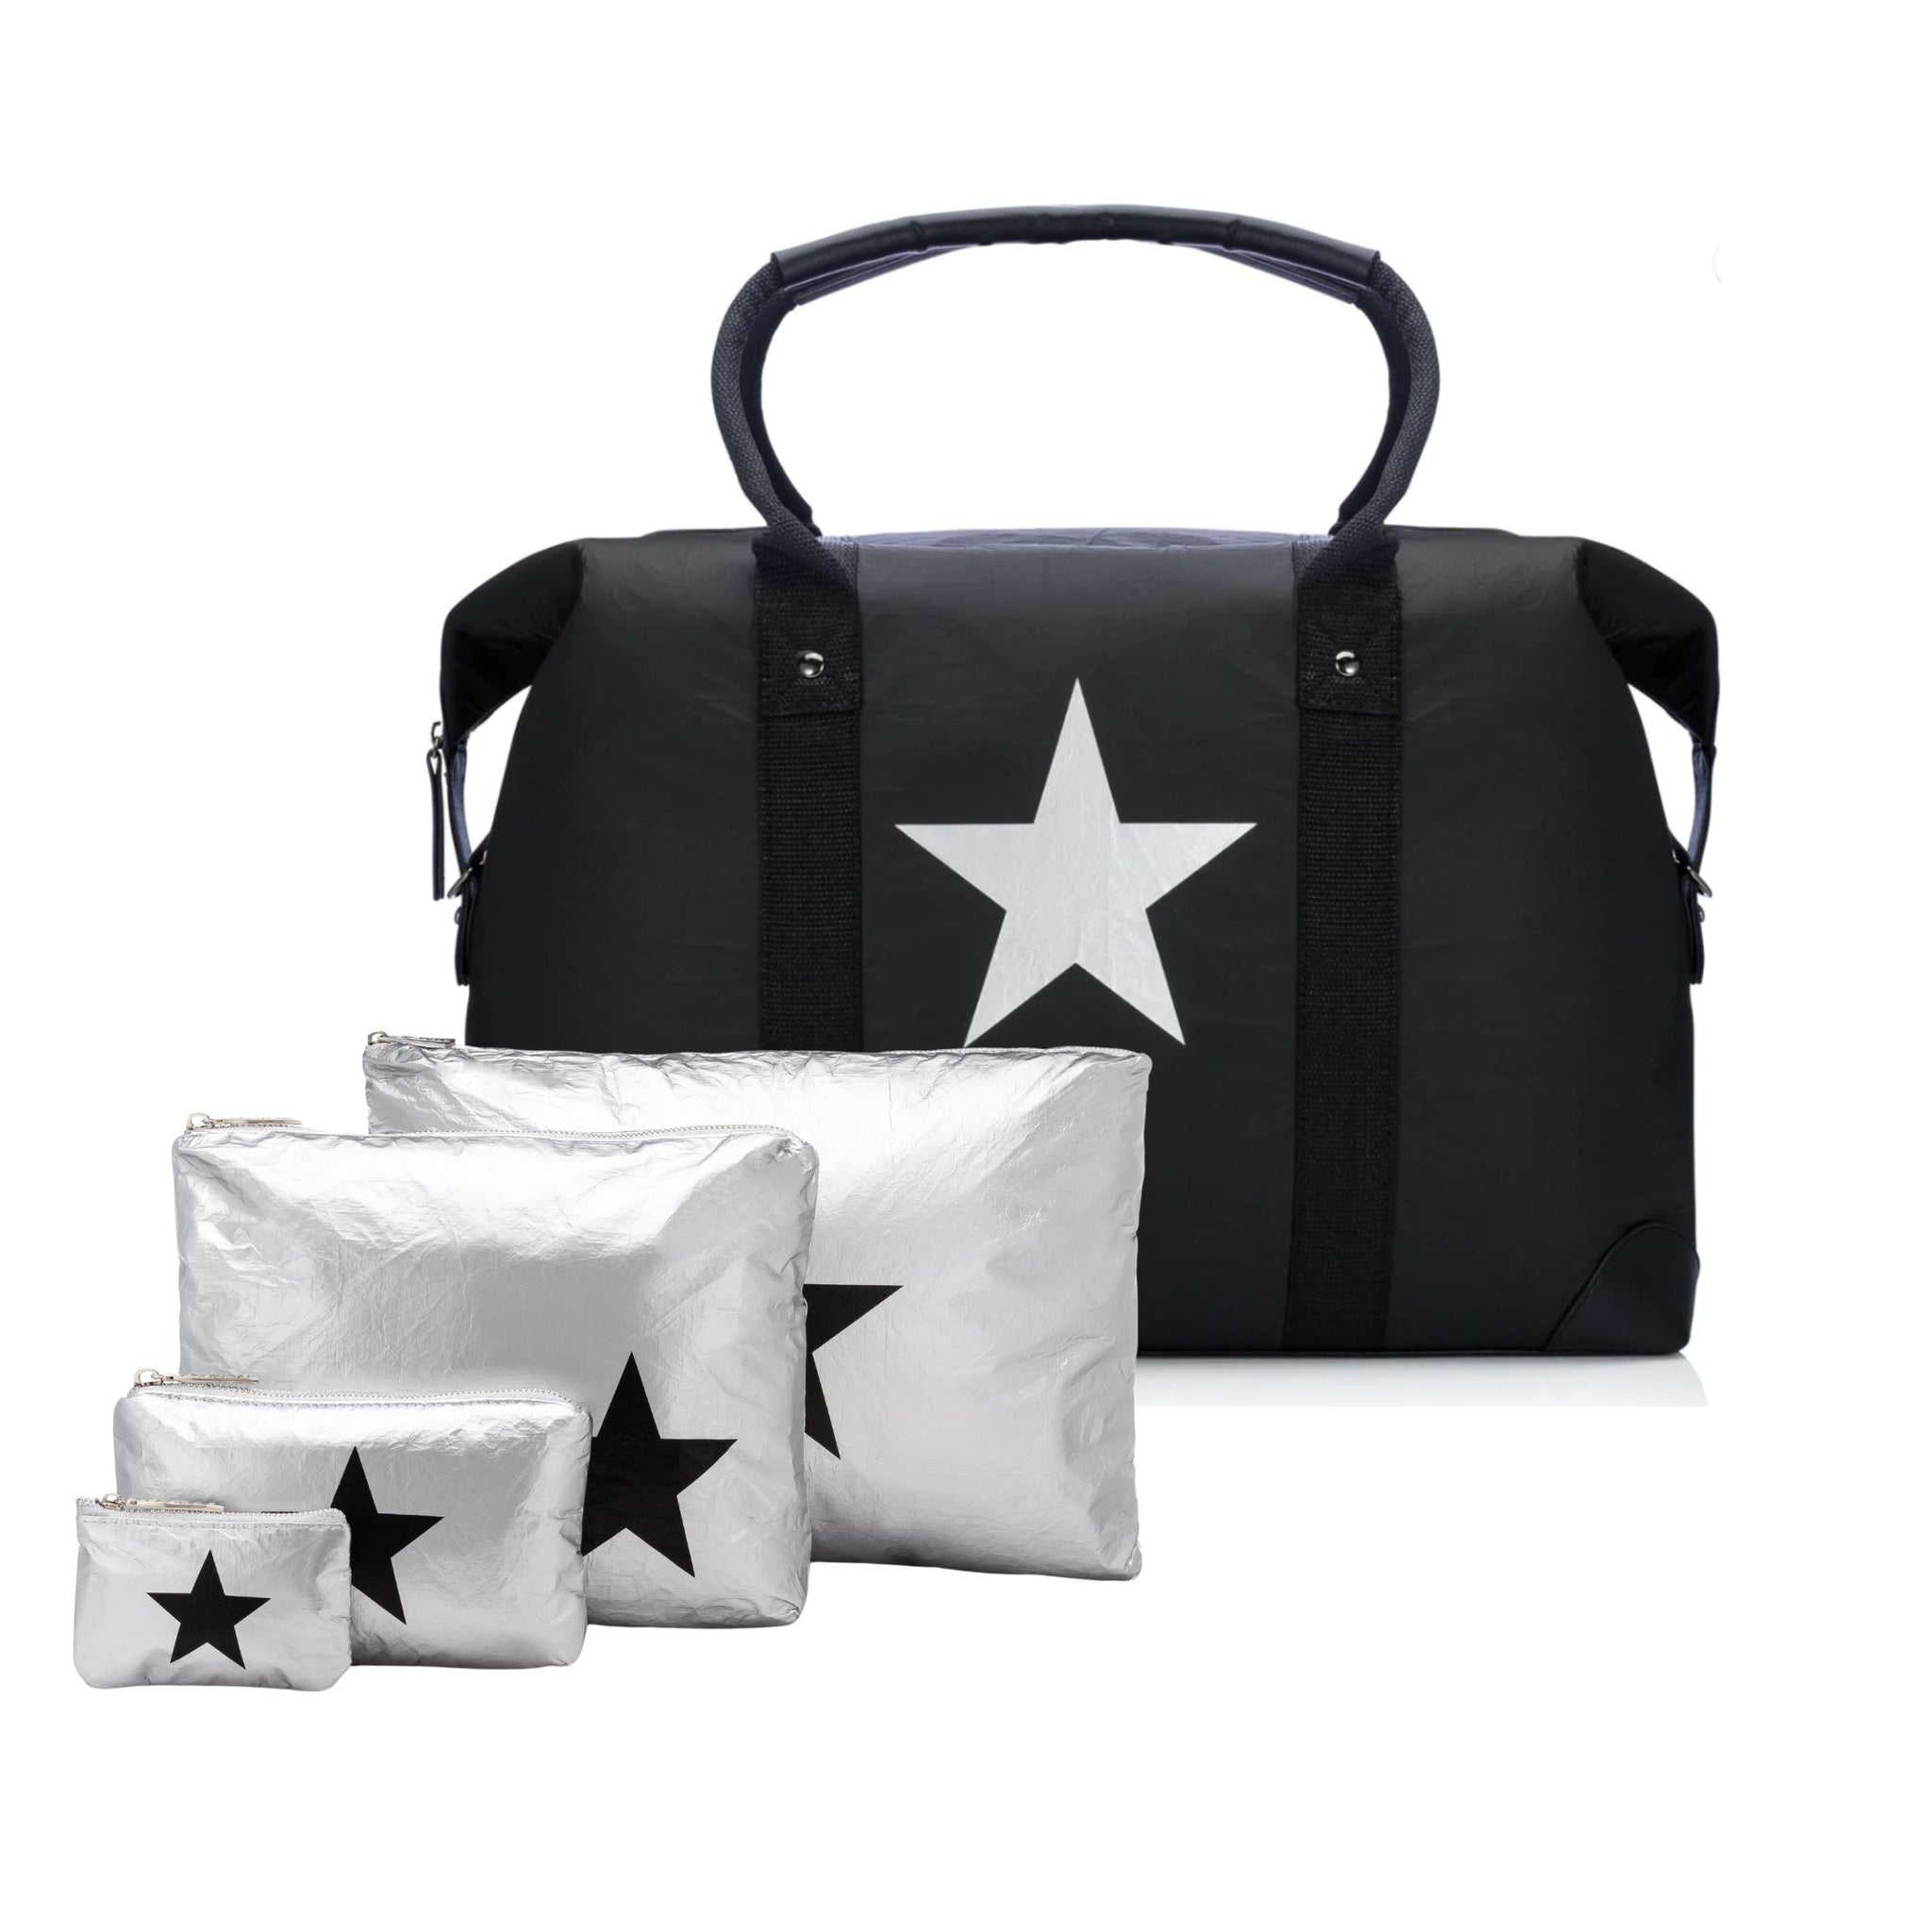 The Weekender Set of Five Travel Bags - Black and Silver with Stars